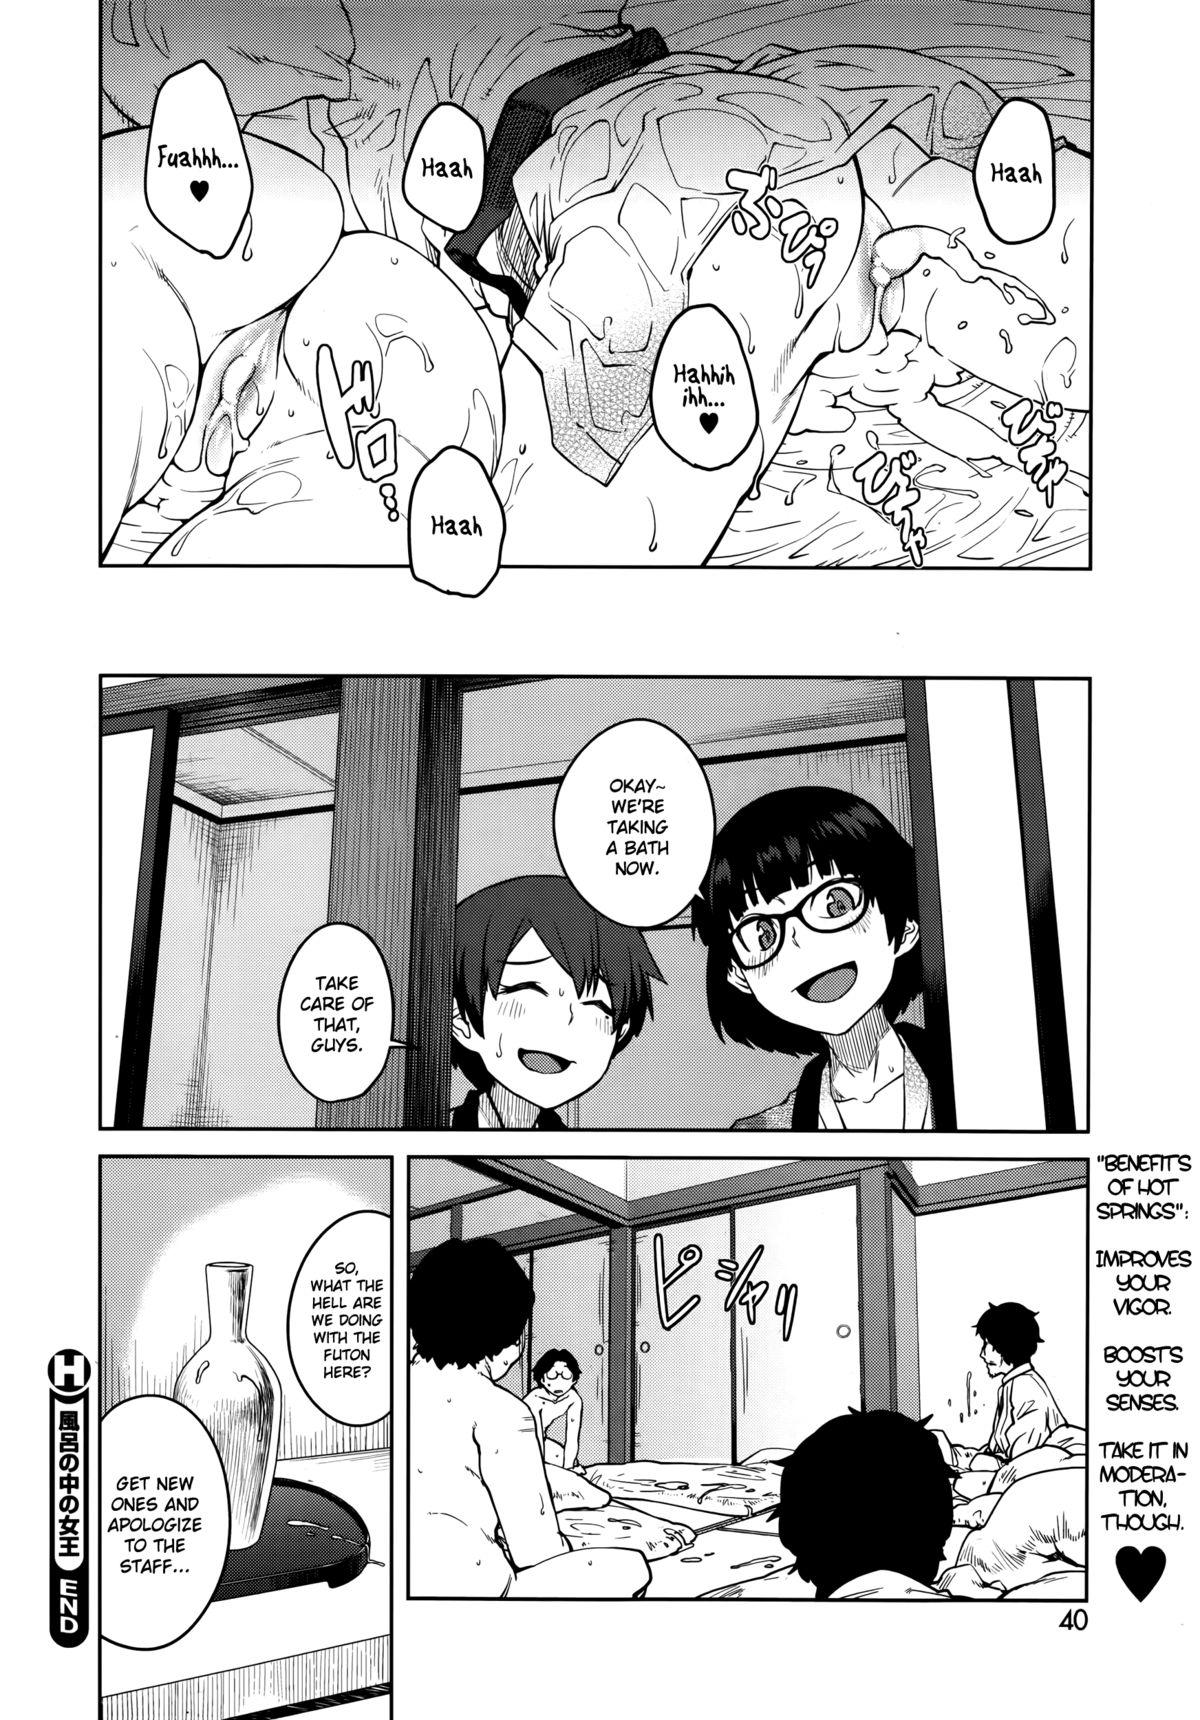 Indoor "Joou" Series | "Queen" Series Ch. 1-2 Shemale Sex - Page 43